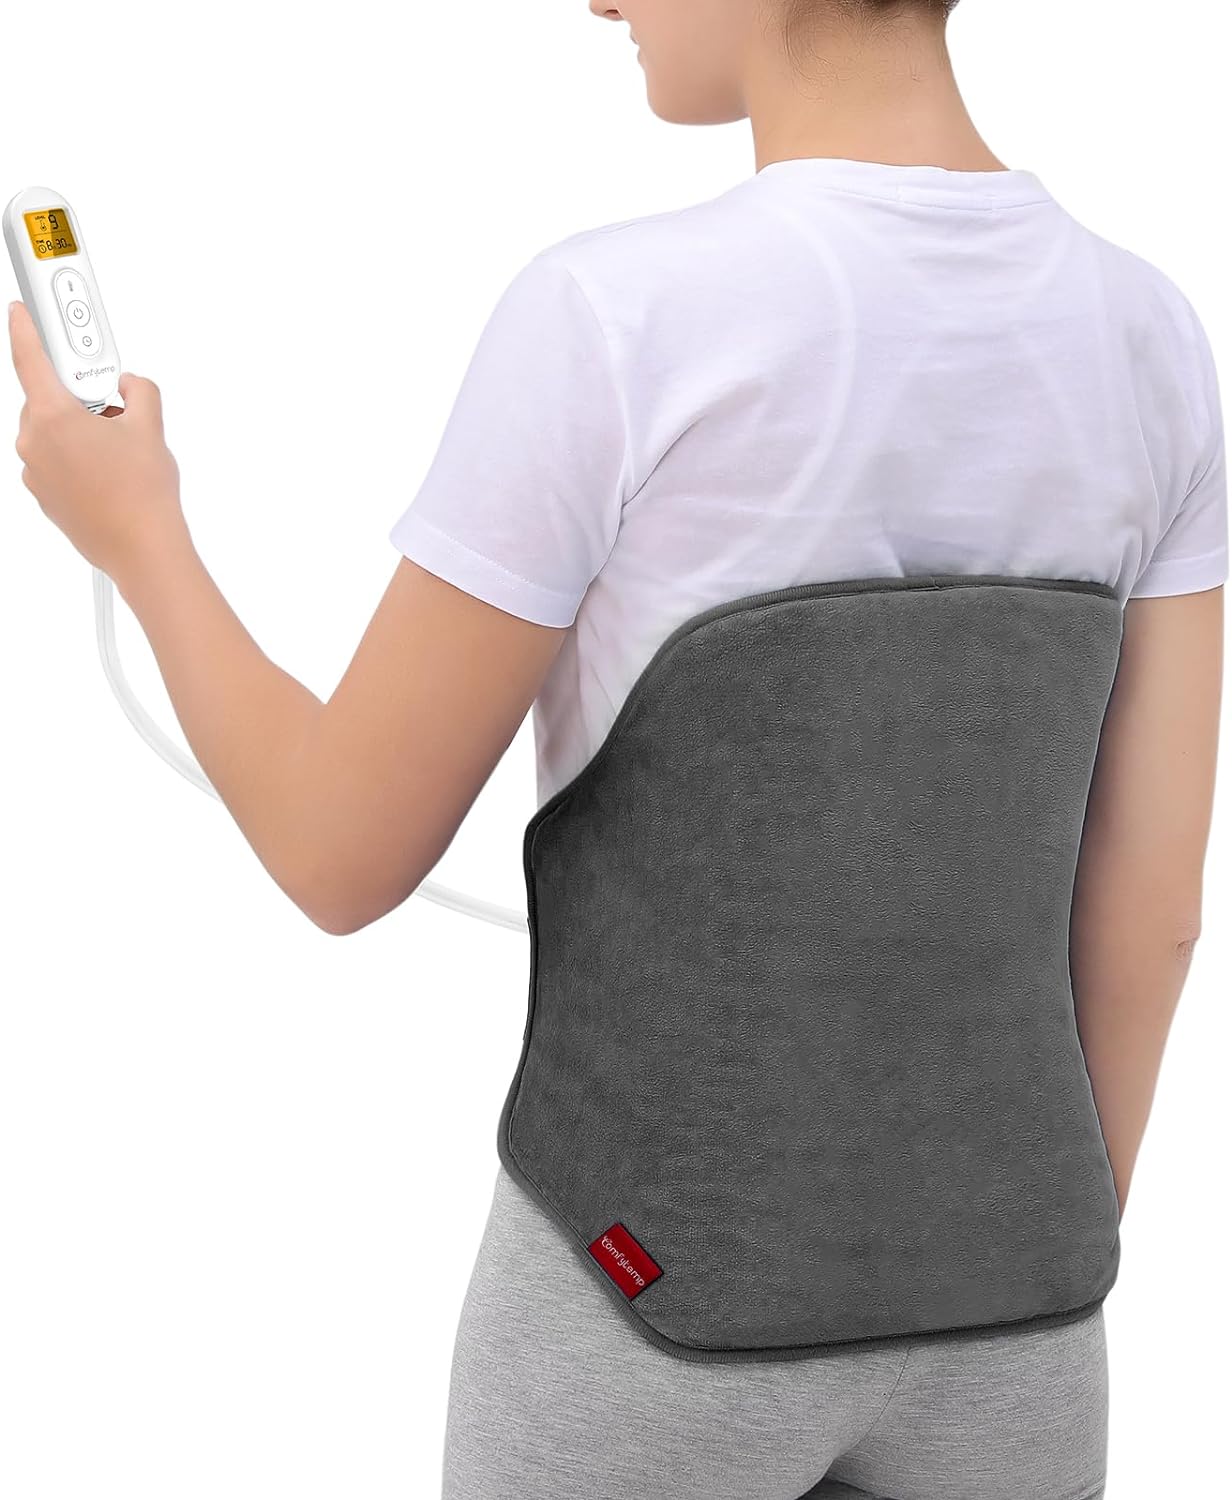  ComfyMed Premium Quality Back Brace CM-102M with Removable  Lumbar Pad for Lower Back Pain Relief (LGE 38-50 Belly) : Health &  Household